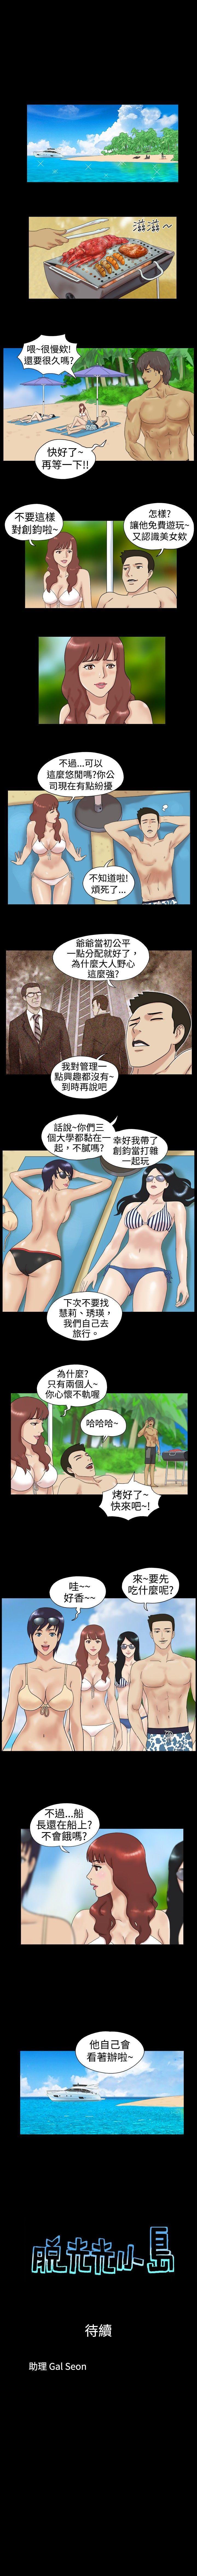 Soapy 脫光光小島 1-39 Latin - Page 4